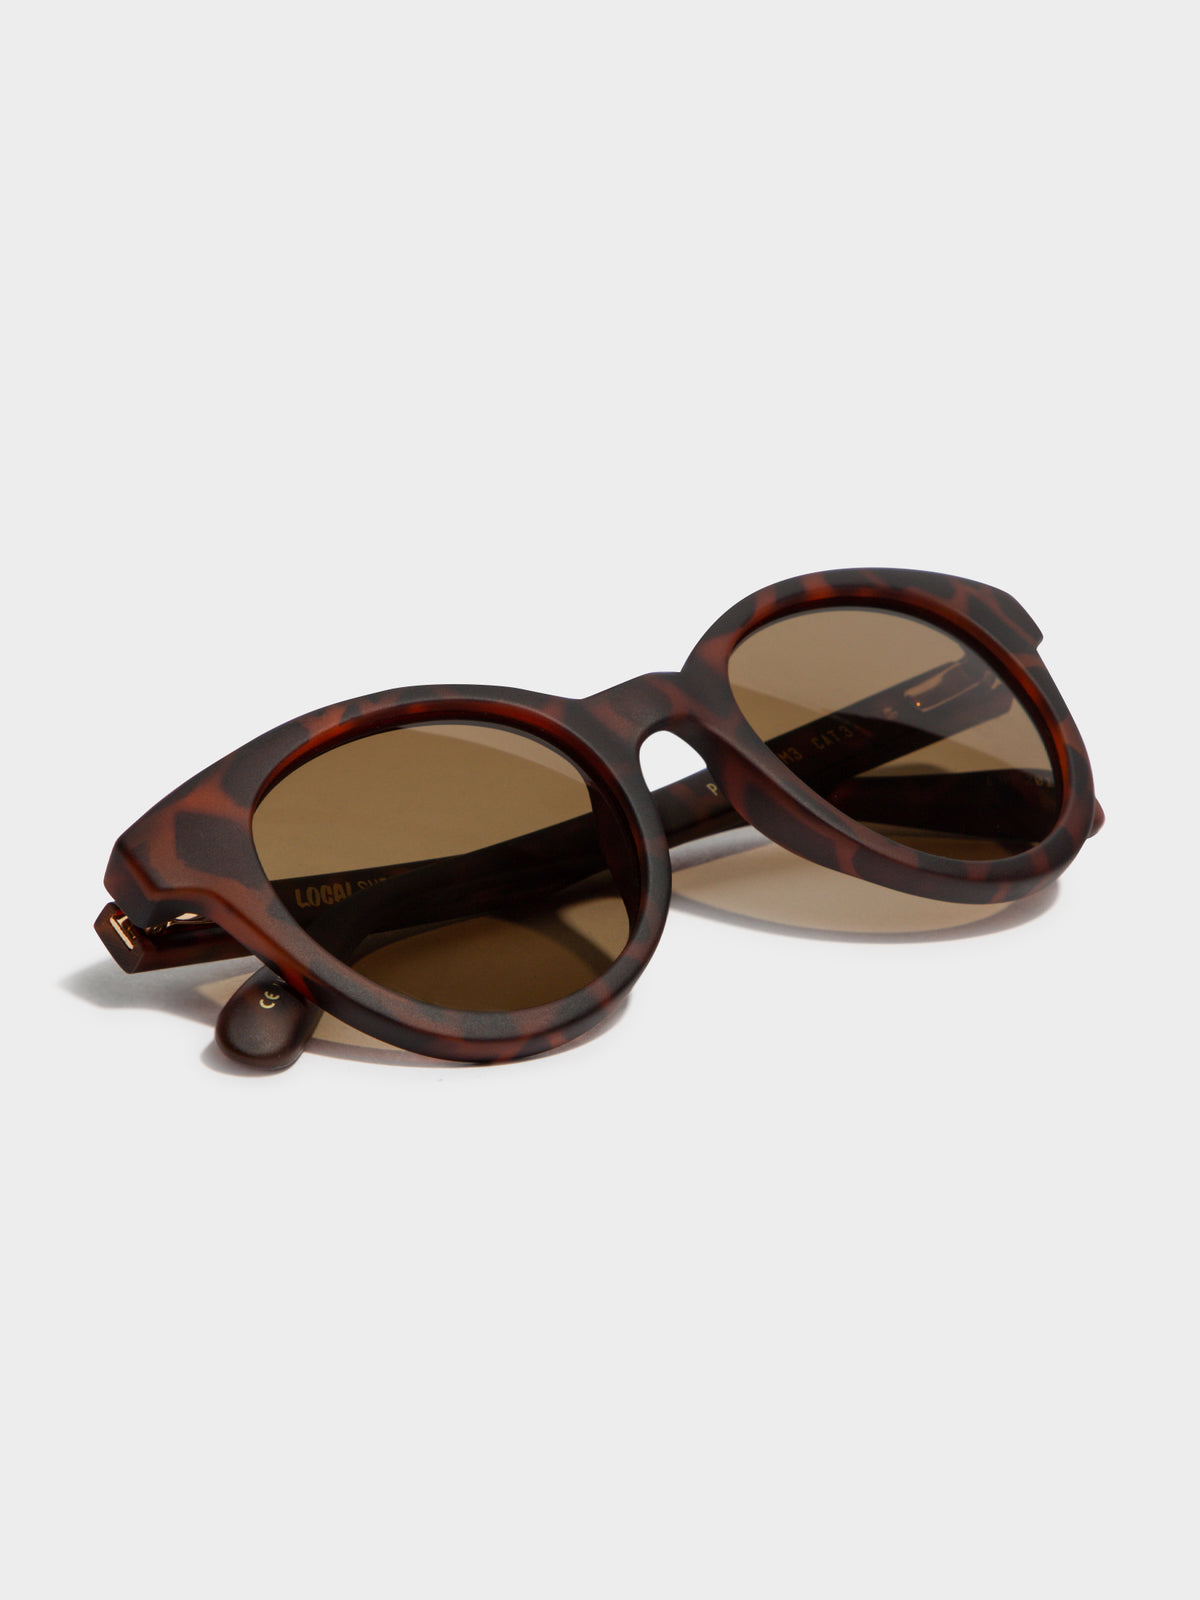 Park TLM3 Polished Sunglasses in Tortoise Shell